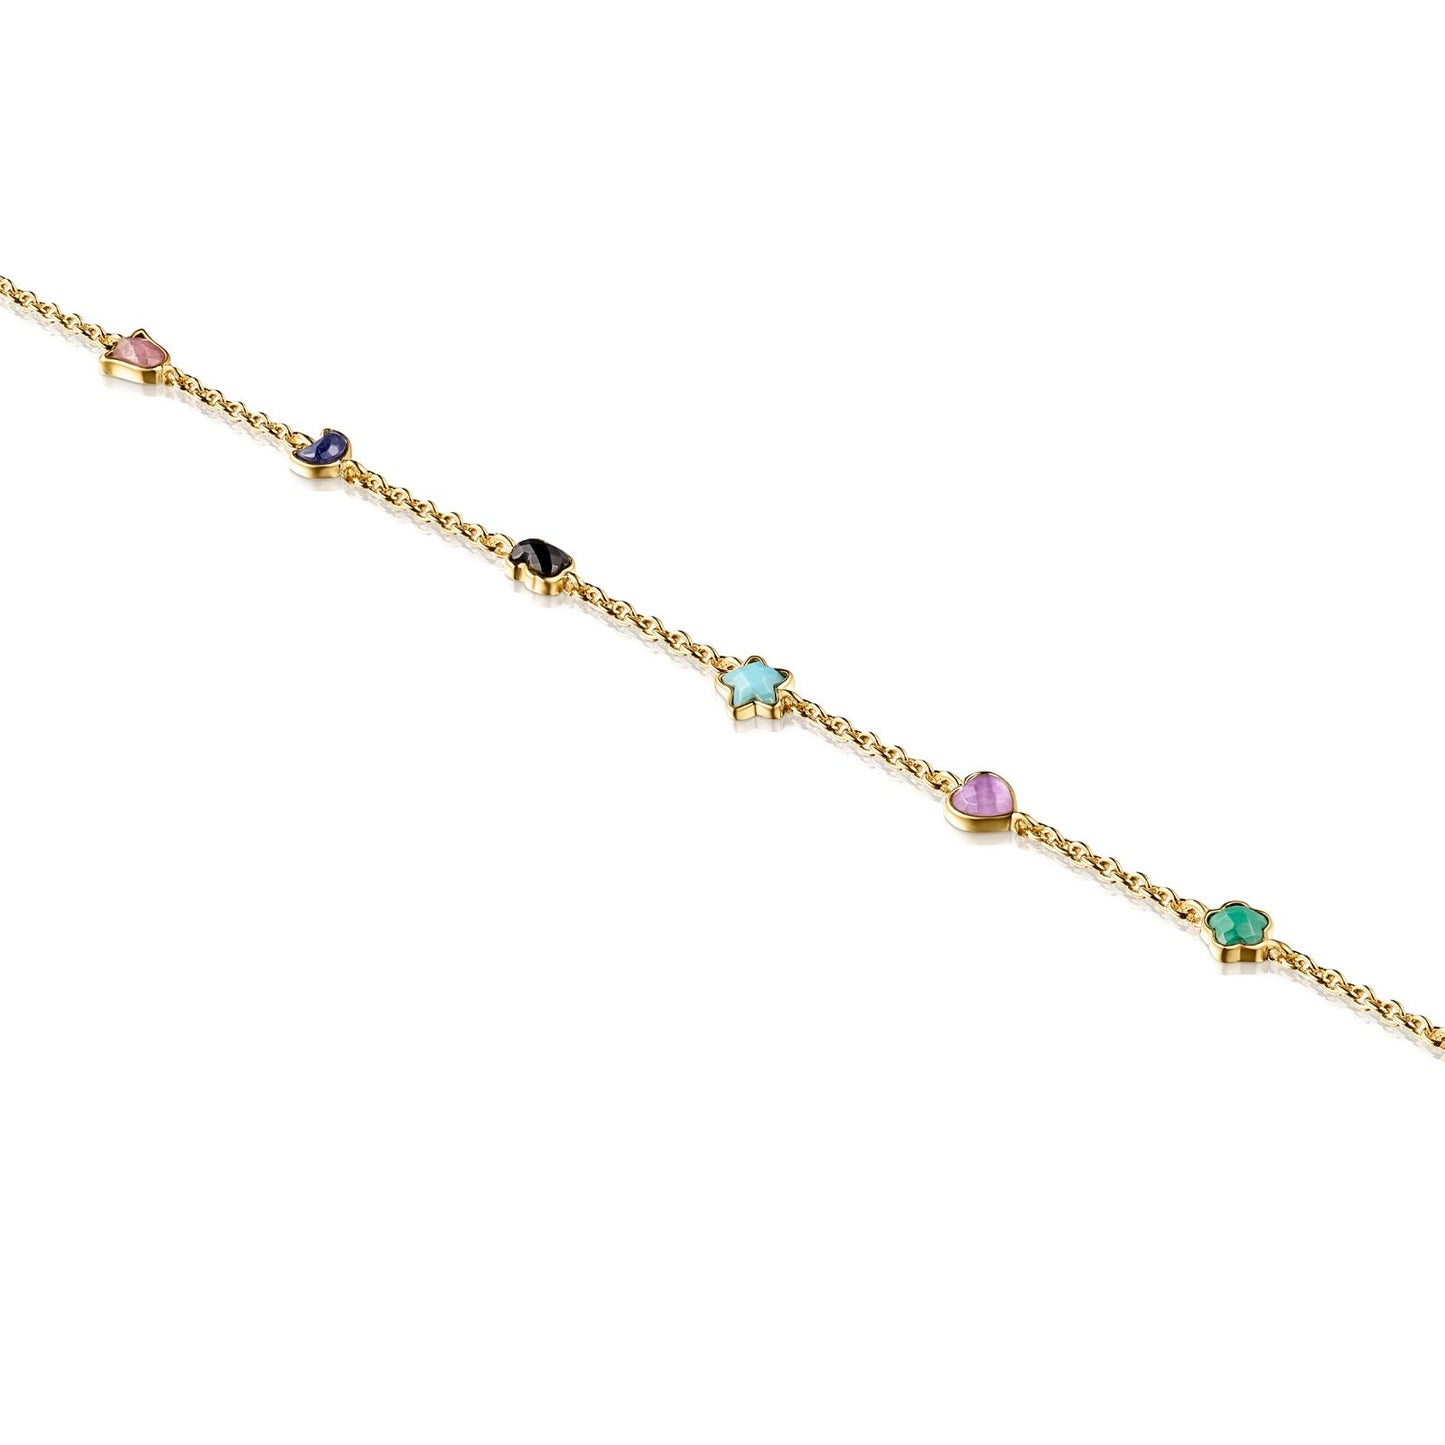 Tous Glory Bracelet in Gold Vermeil with Gemstones 918591520